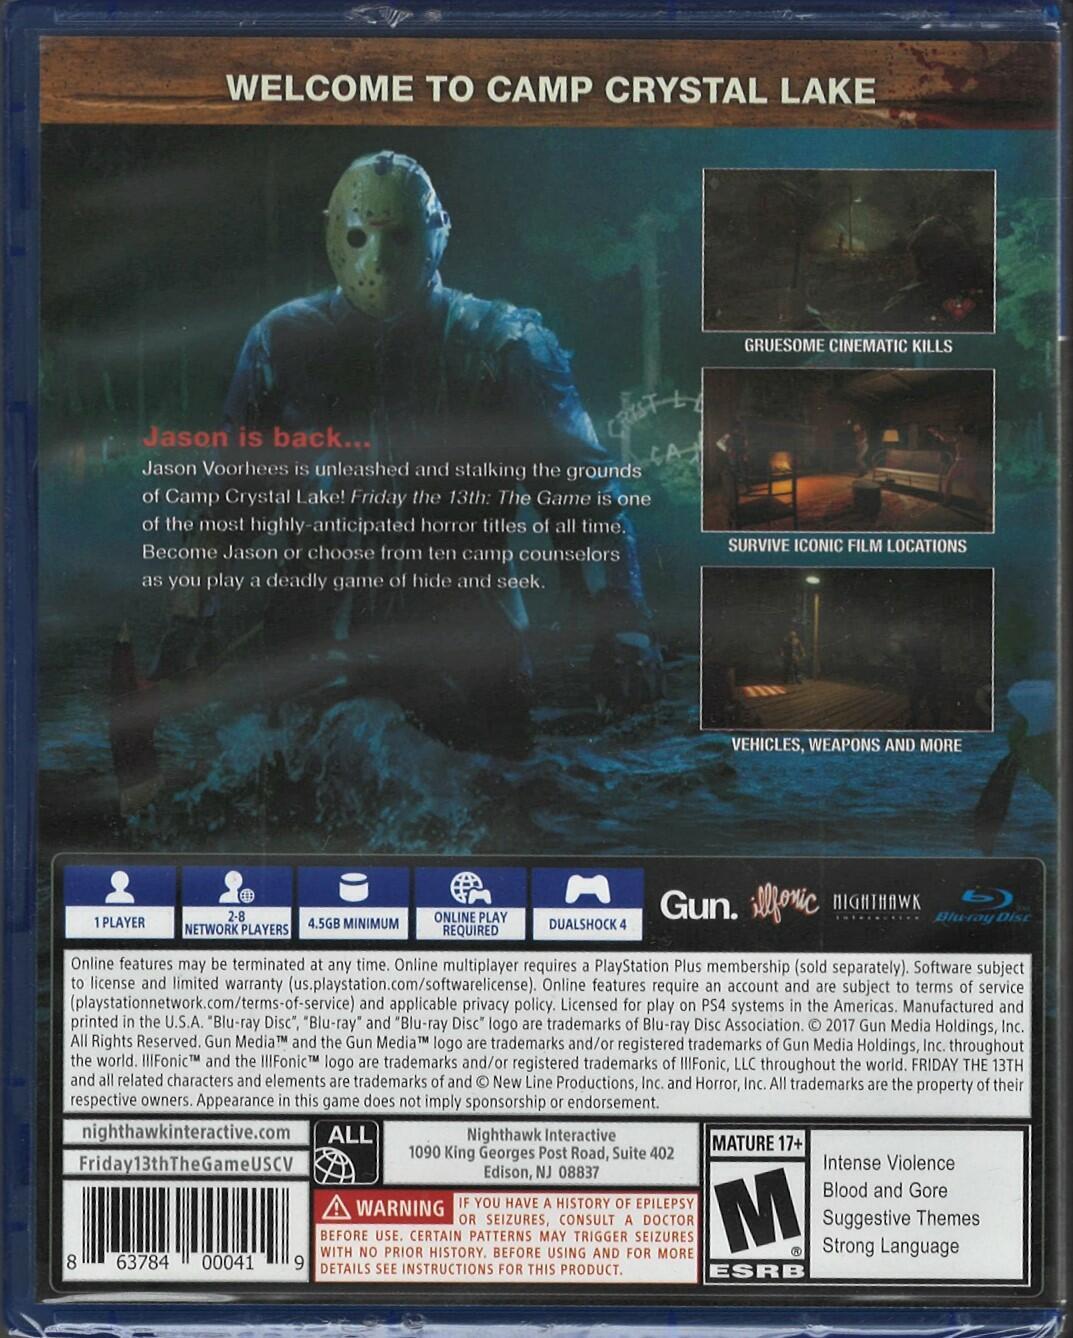 Friday The 13th: The Game PS4 (Brand New Factory Sealed US Version)  PlayStation 